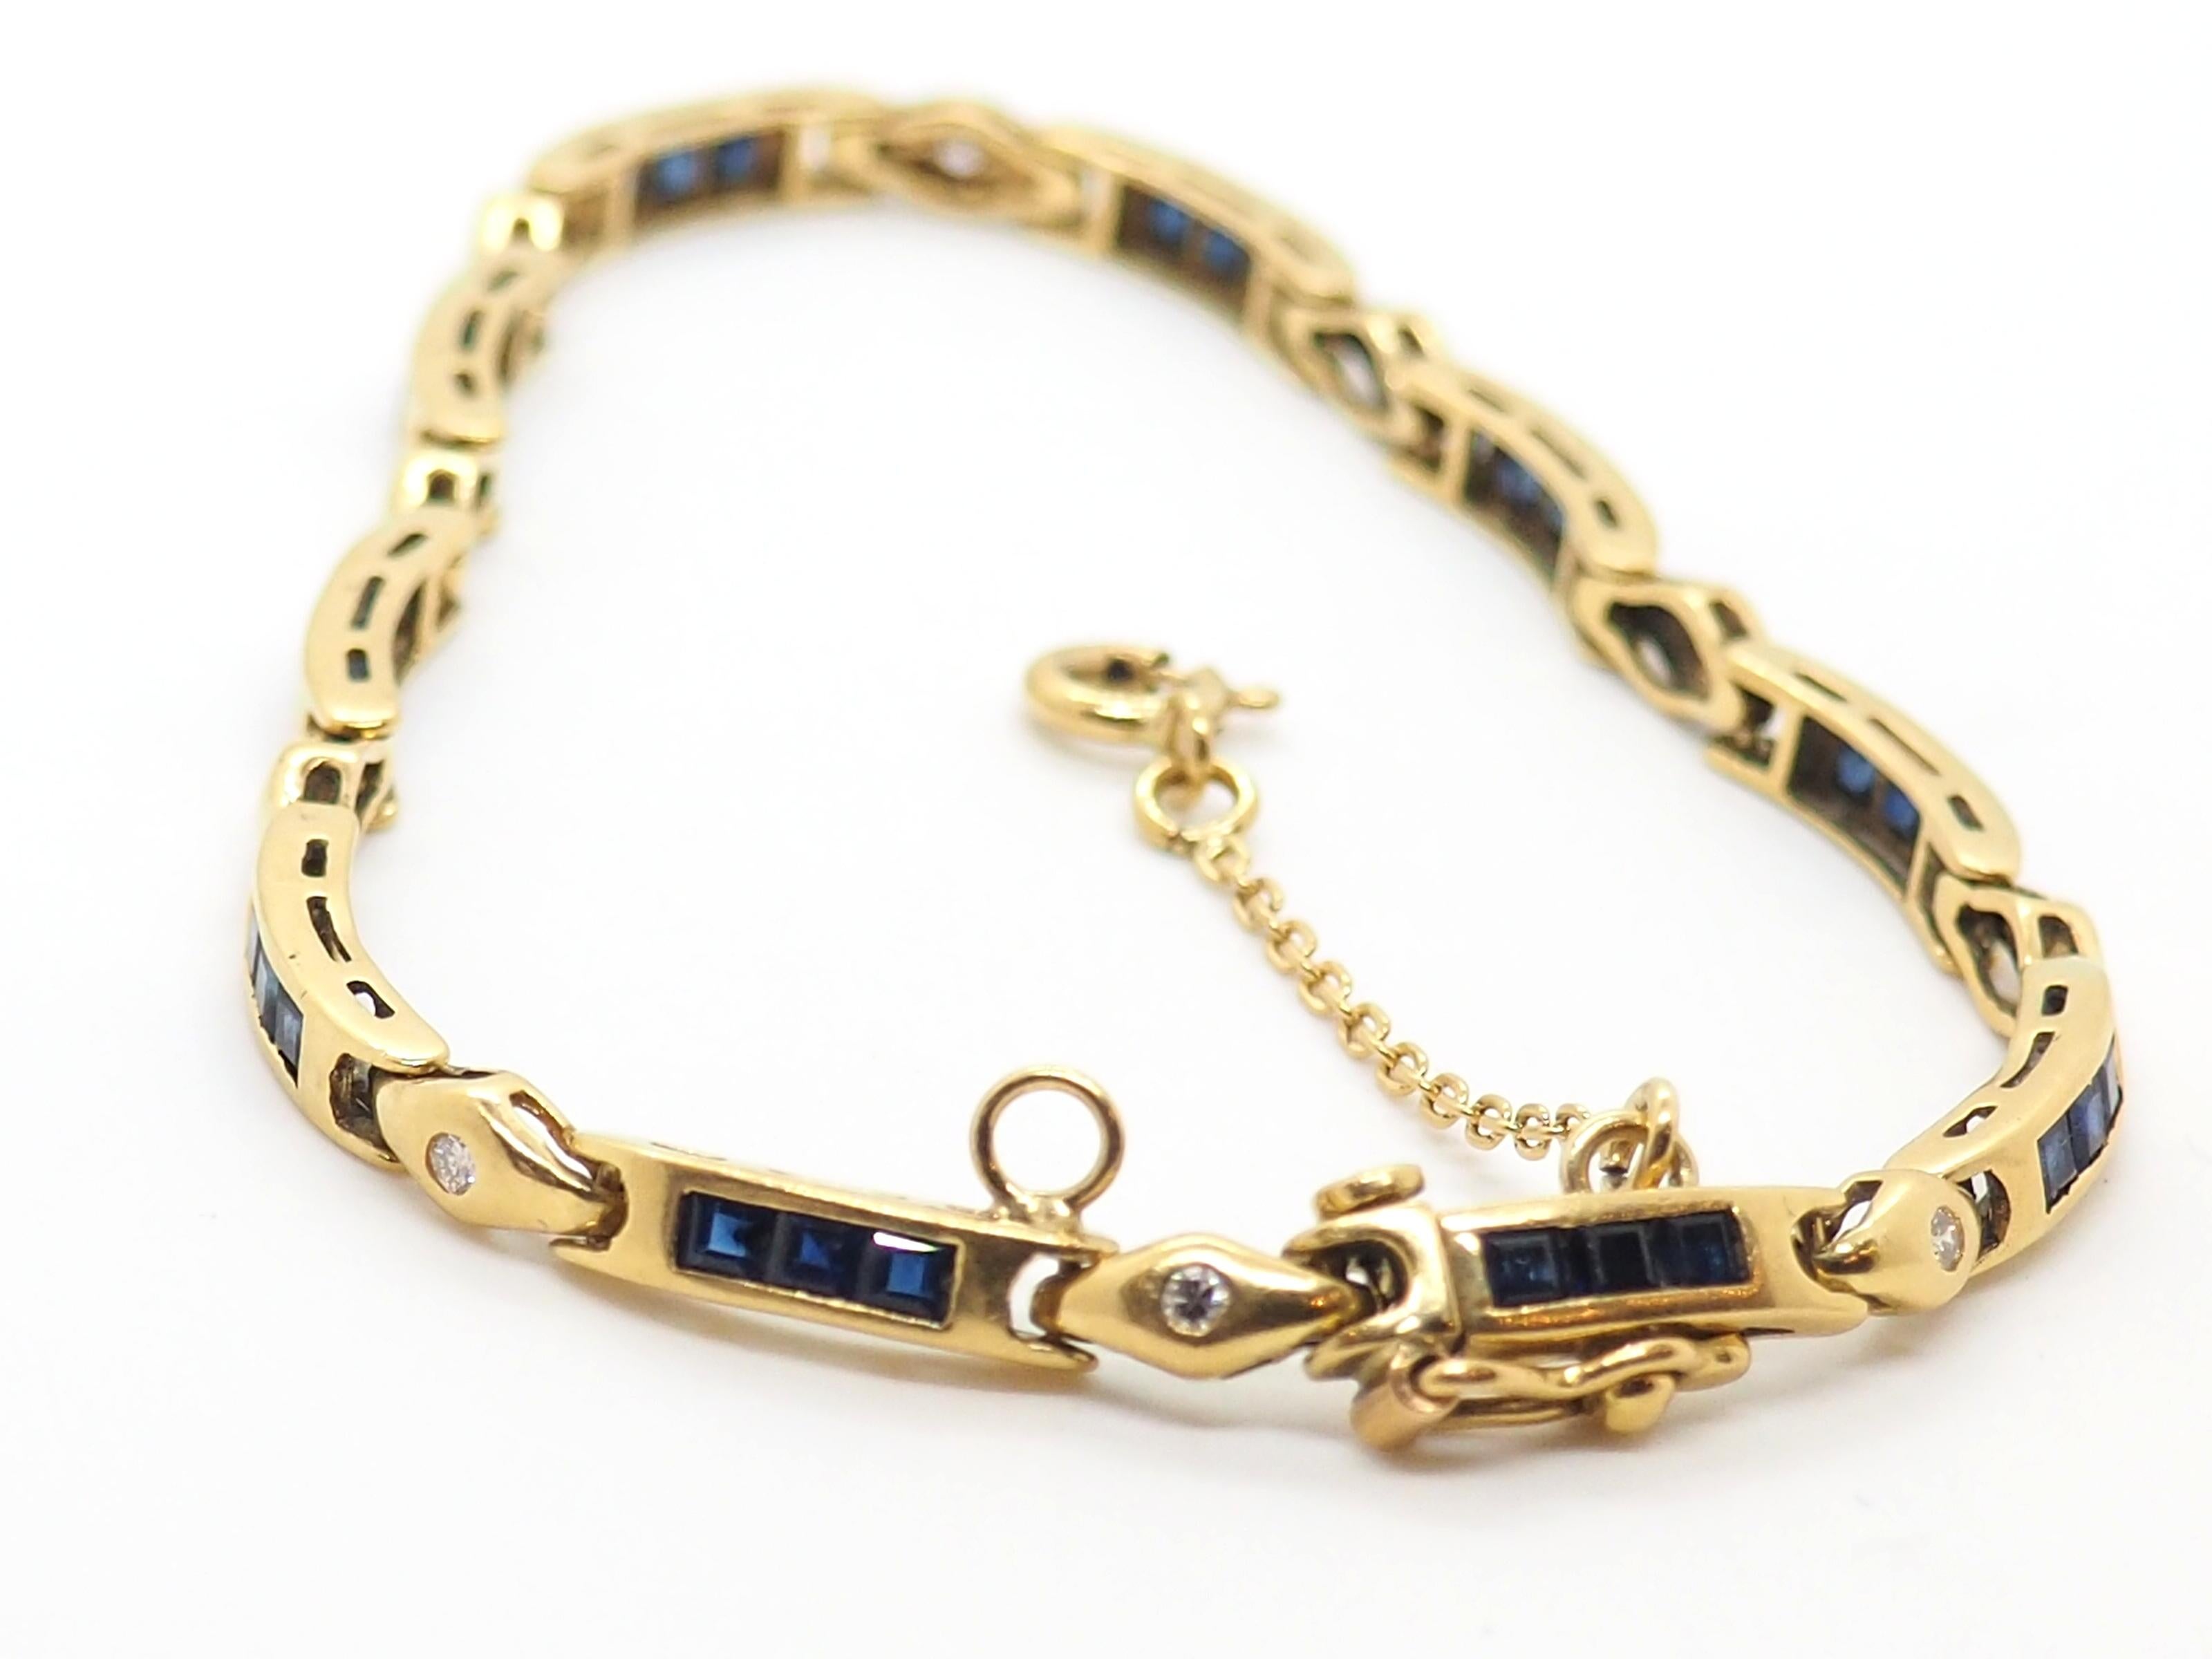 Vintage sapphire bracelet crafted in 18 Karat yellow gold.

Unveiling a Captivating Masterpiece: Exquisite Vintage 18k Yellow Gold Bracelet Adorned with 30 Square Sapphires and 10 Brilliant Round Diamonds 0.3 Carats. 

This bracelet is a testament